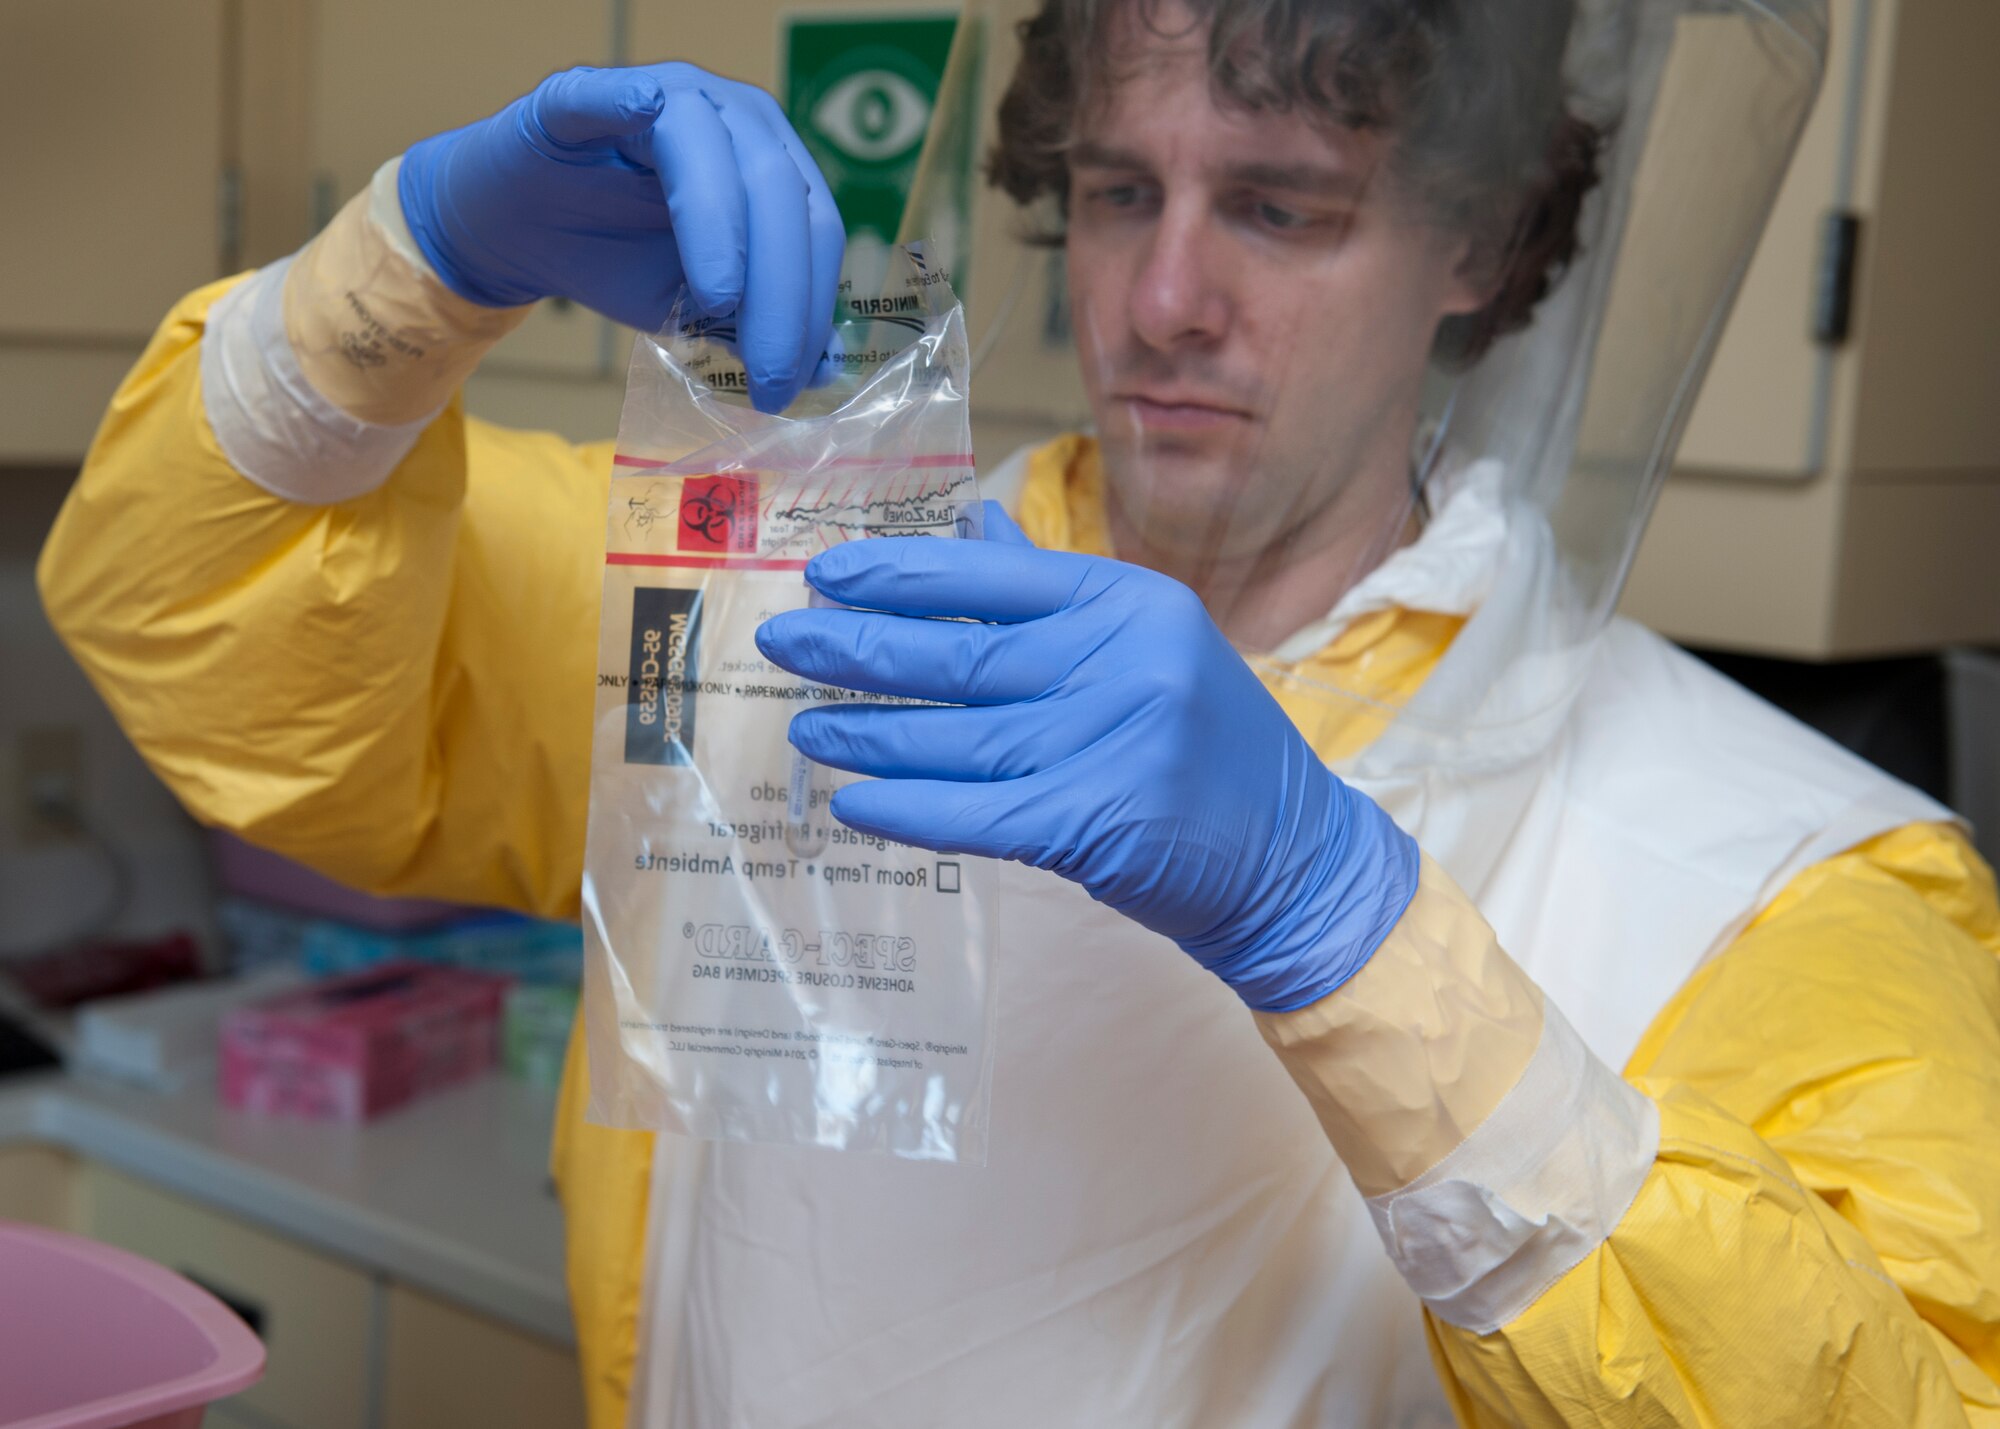 Dan Shultz, Christiana Care registered nurse, places a blood sample vile into a containment bag during an Ebola Response Plan and Transport exercise Nov. 3, 2015, at the Wilmington Hospital in Wilmington, Del. Shultz was one of several medical providers who are trained to use proper personal protective equipment when treating an Ebola patient. (U.S. Air Force photo/Senior Airman Zachary Cacicia)